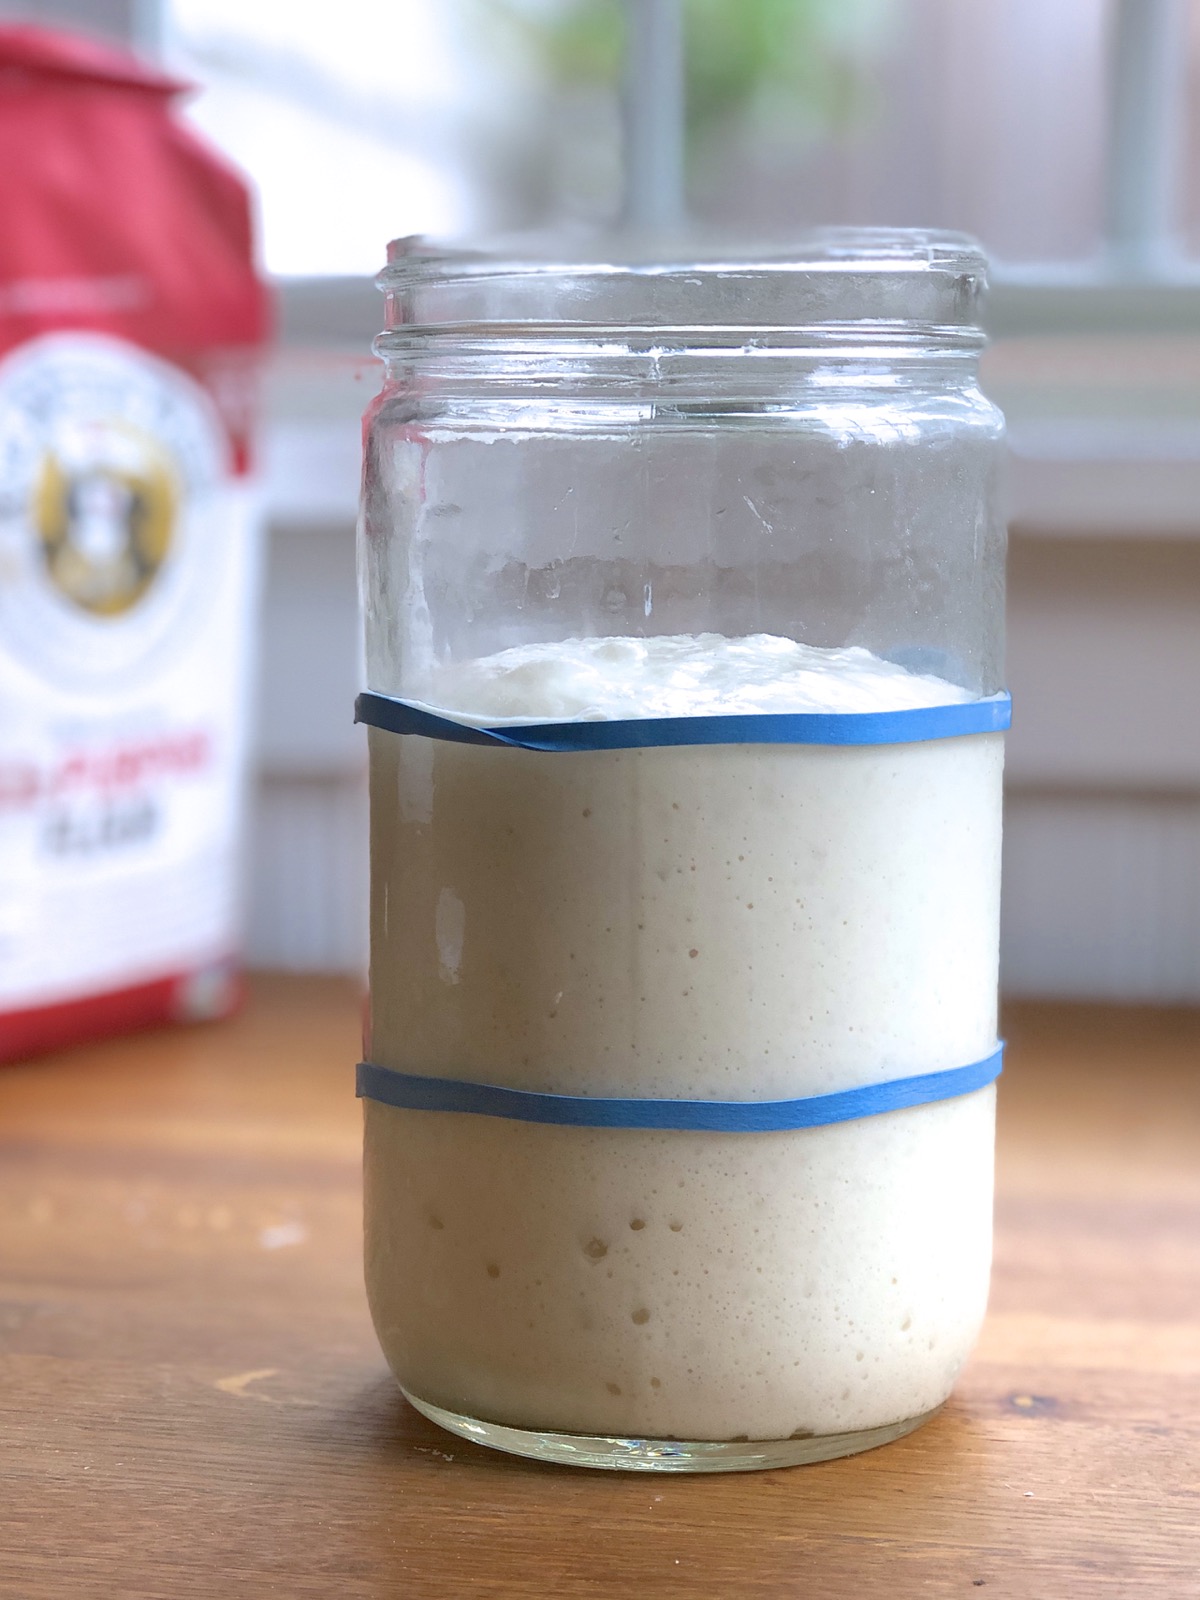 Fed sourdough starter in a jar, fully risen and ready to use.